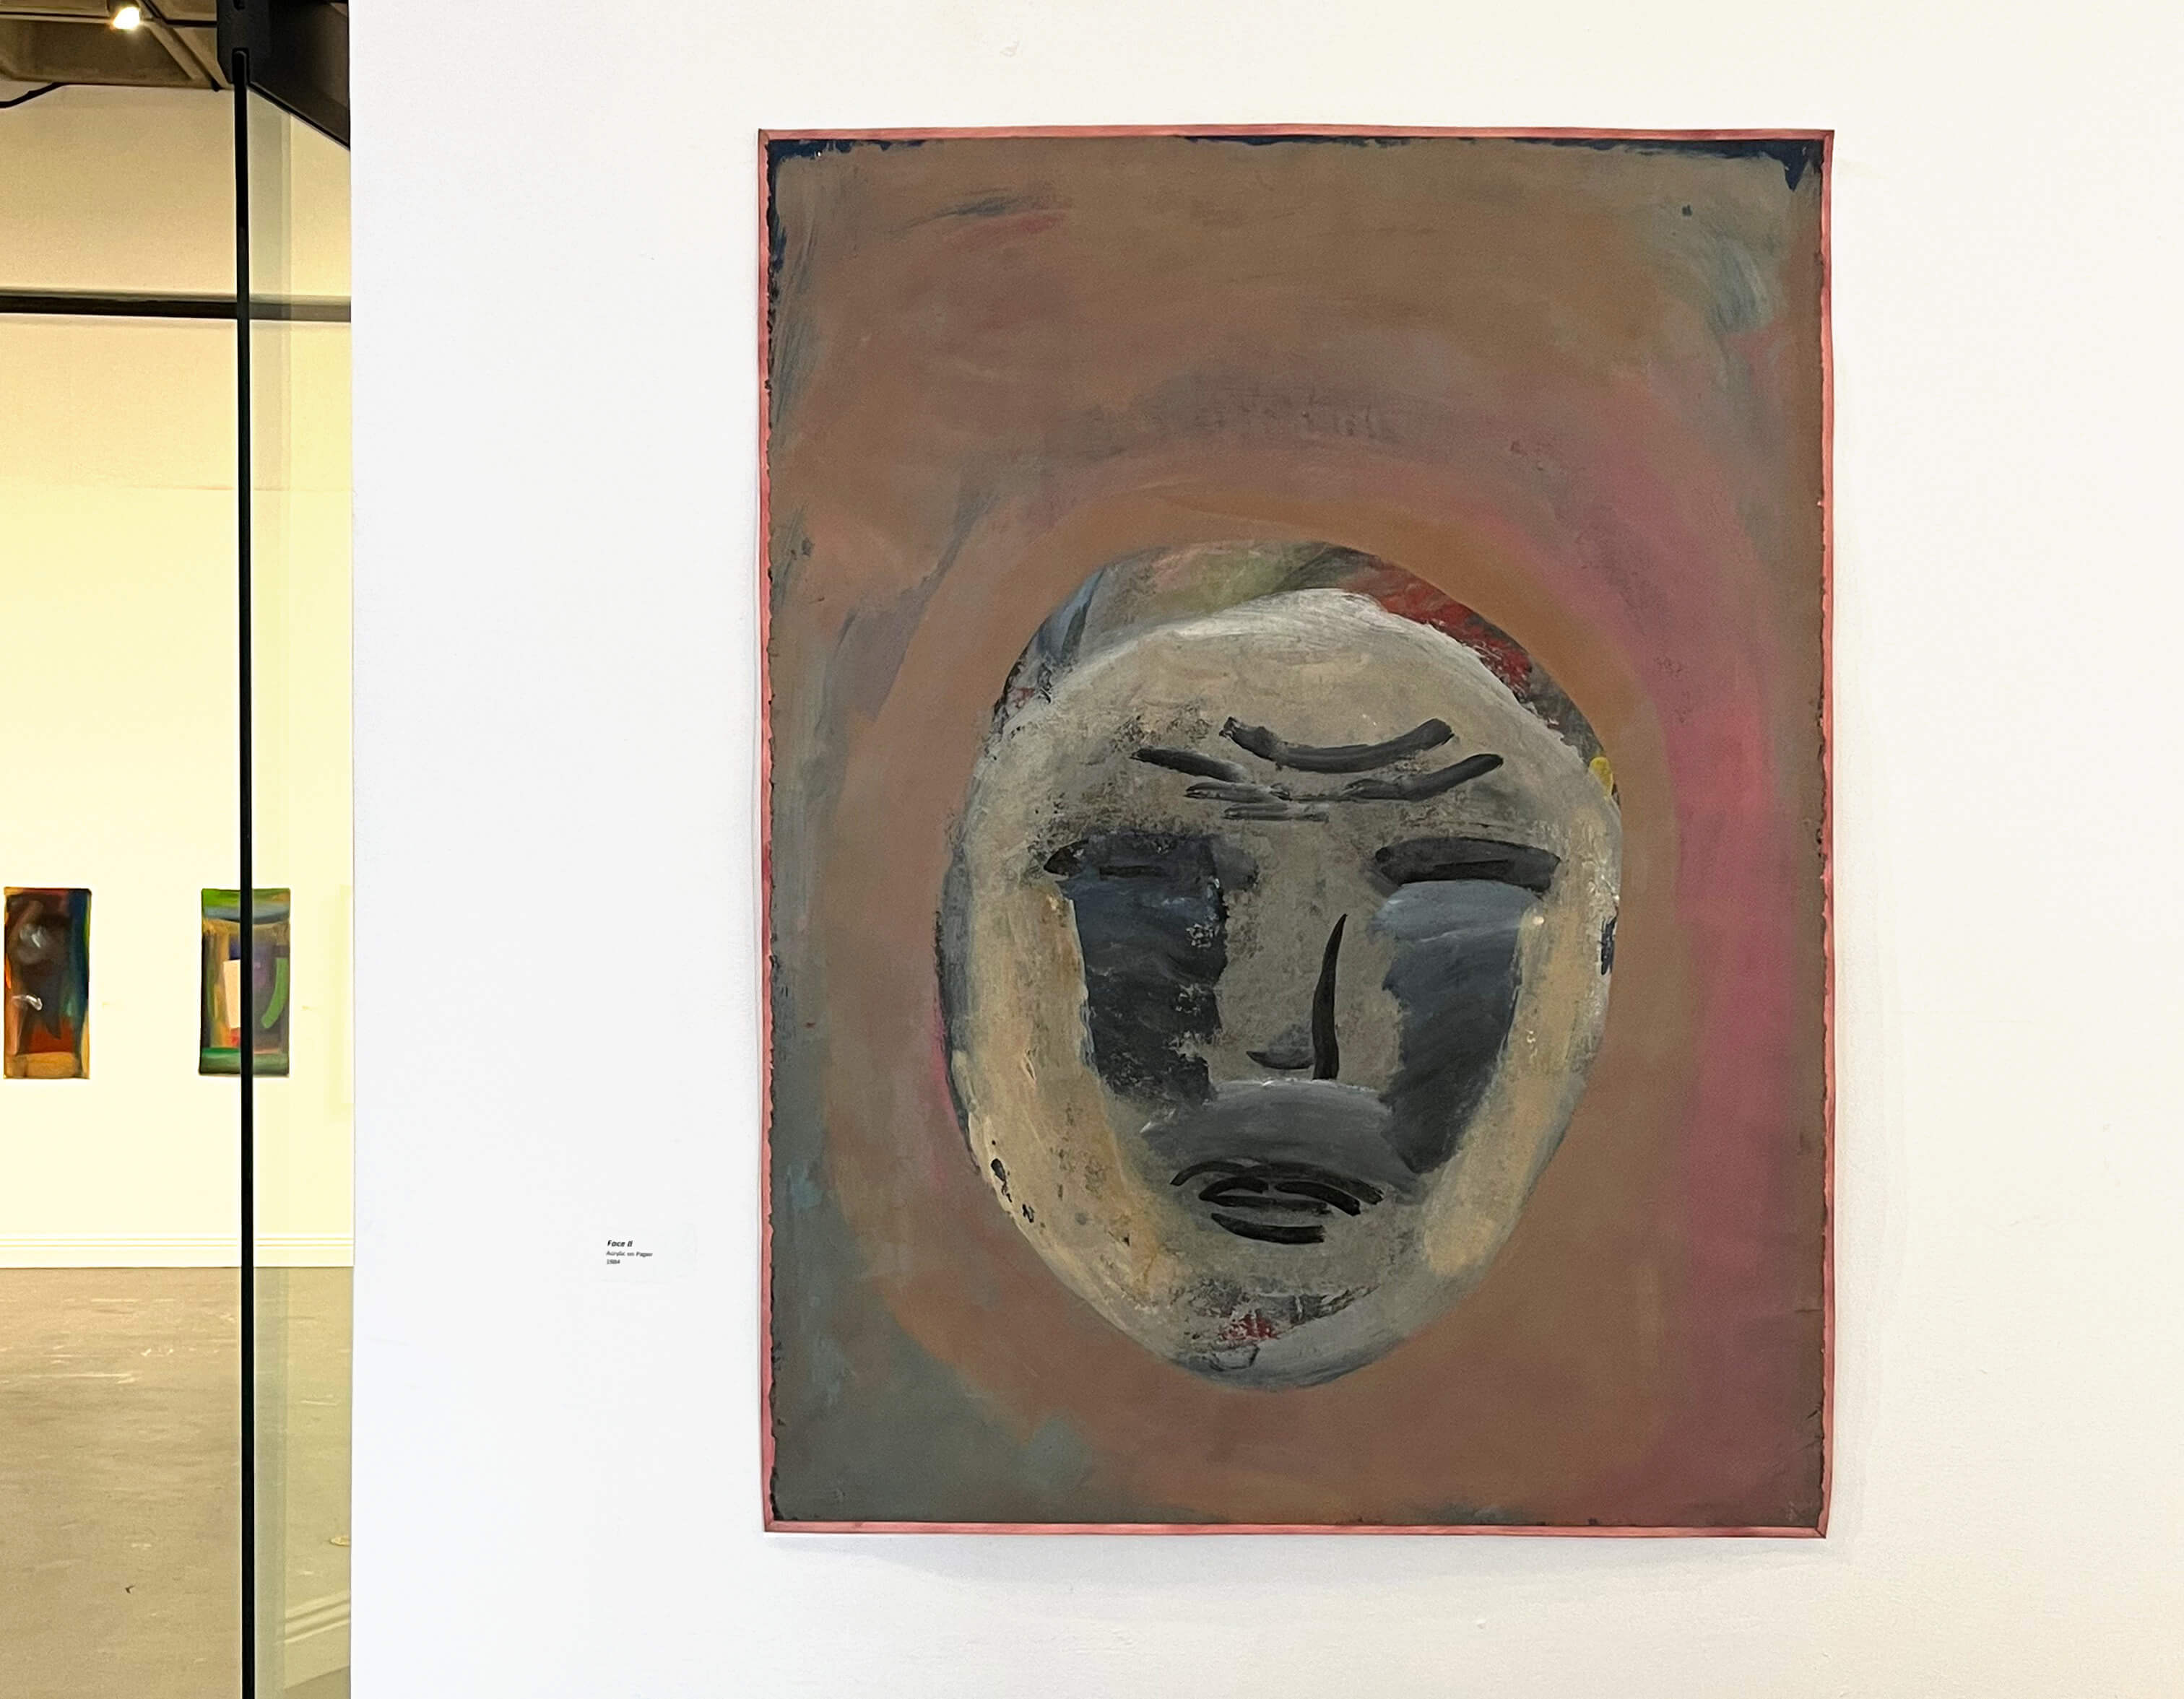 Installation view, Keisho Okayama: Selected Works - Face II, acrylic on paper, 1984, at the entrance to the exhibition.